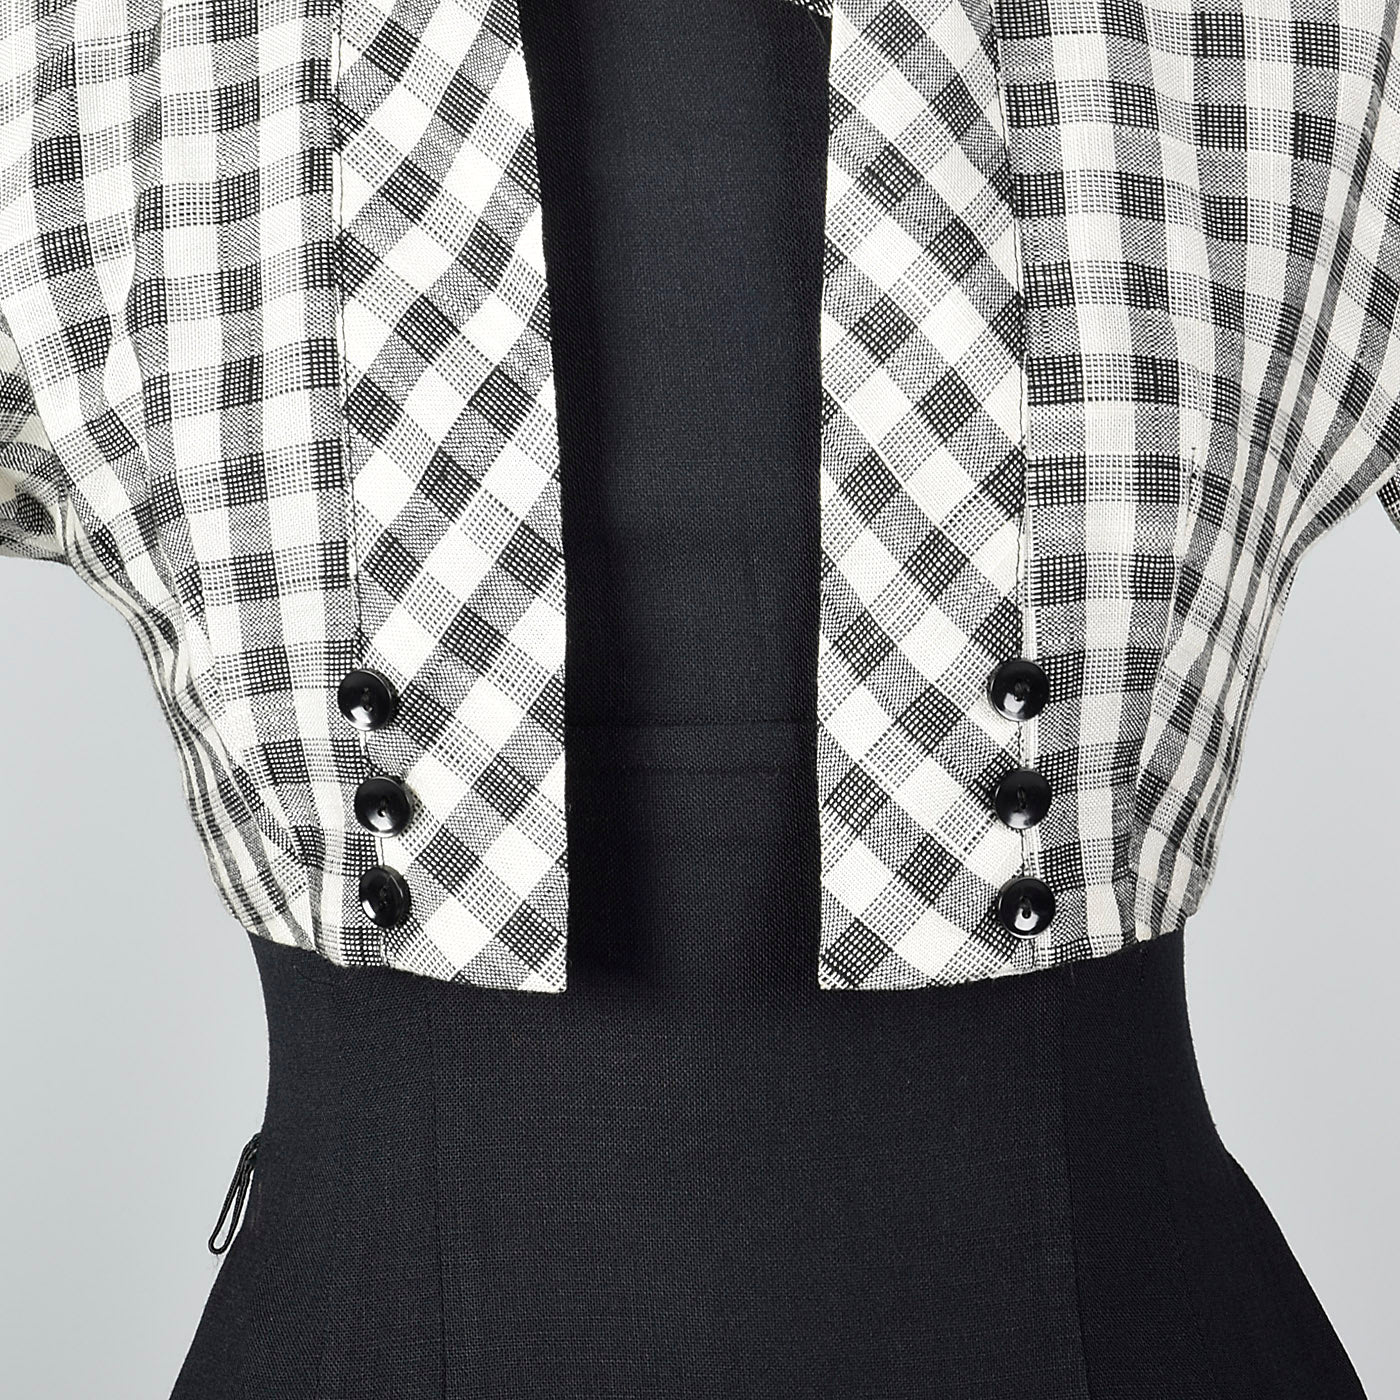 1950s Black Wiggle Dress with Gingham Trim and Jacket